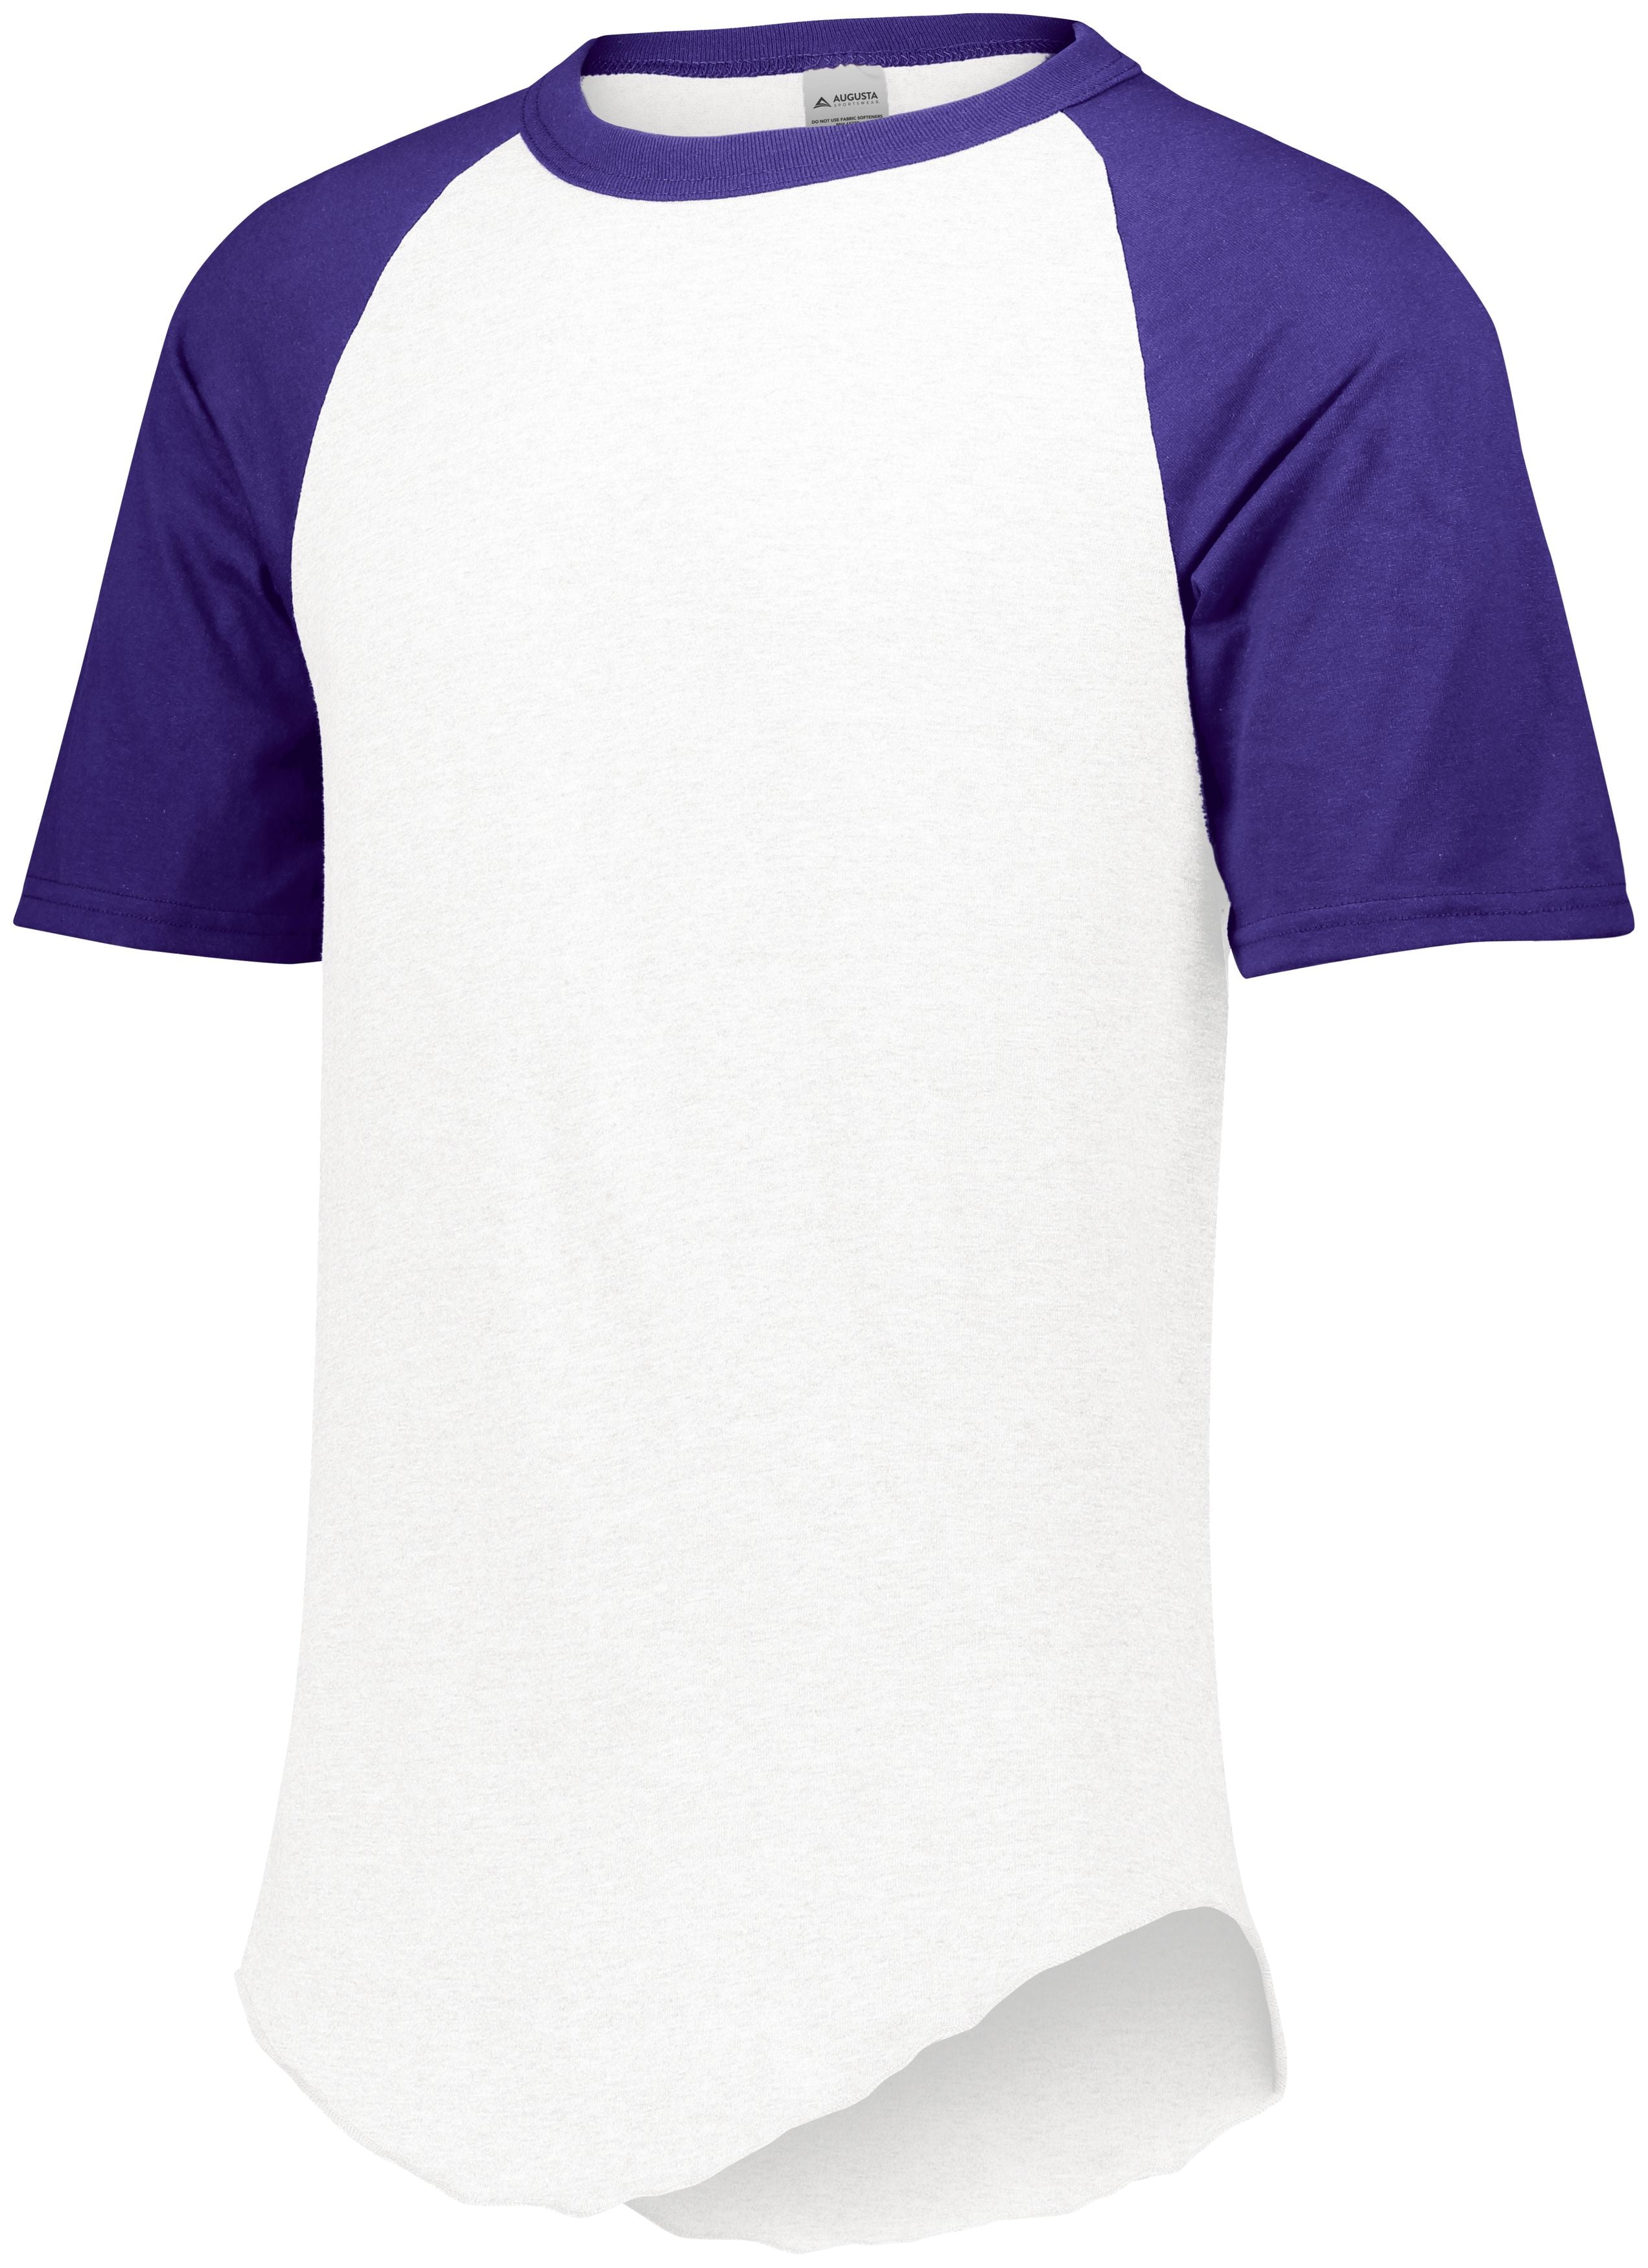 Augusta Sportswear Short Sleeve Baseball Jersey in White/Purple  -Part of the Adult, Adult-Jersey, Augusta-Products, Baseball, Shirts, All-Sports, All-Sports-1 product lines at KanaleyCreations.com